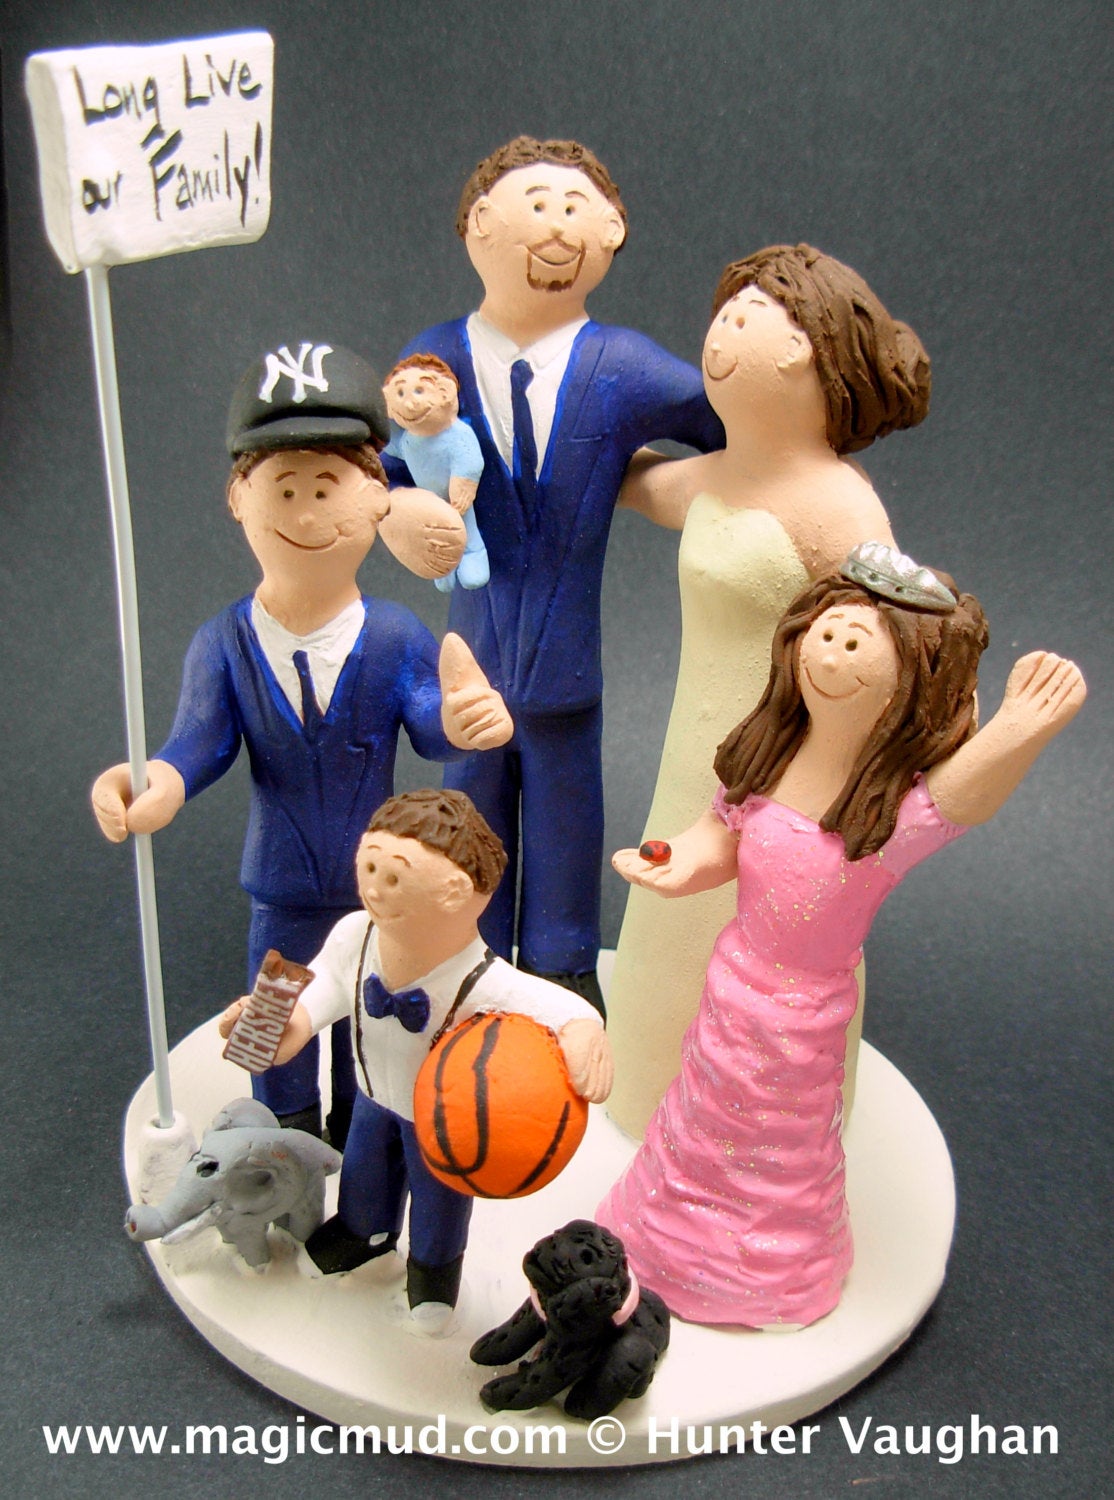 Wedding Cake Topper with Our Children, Wedding CakeTopper with Children, Mixed Family Wedding Cake Topper, Blended Family Wedding CakeTopper - iWeddingCakeToppers